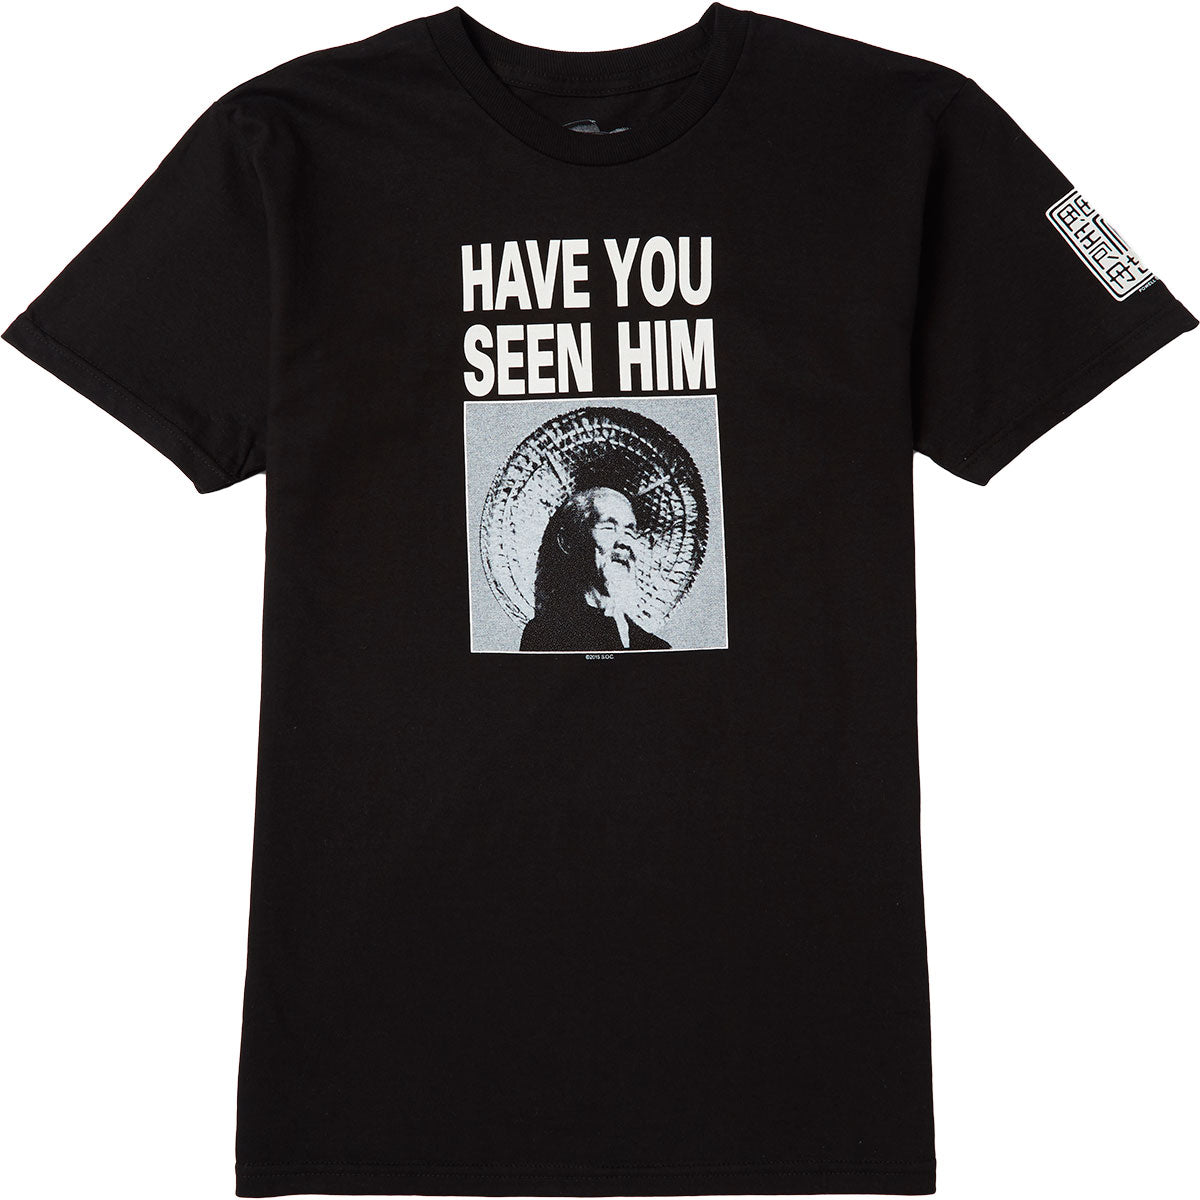 Powell-Peralta Animal Chin Have You Seen Him T-Shirt - Black image 1